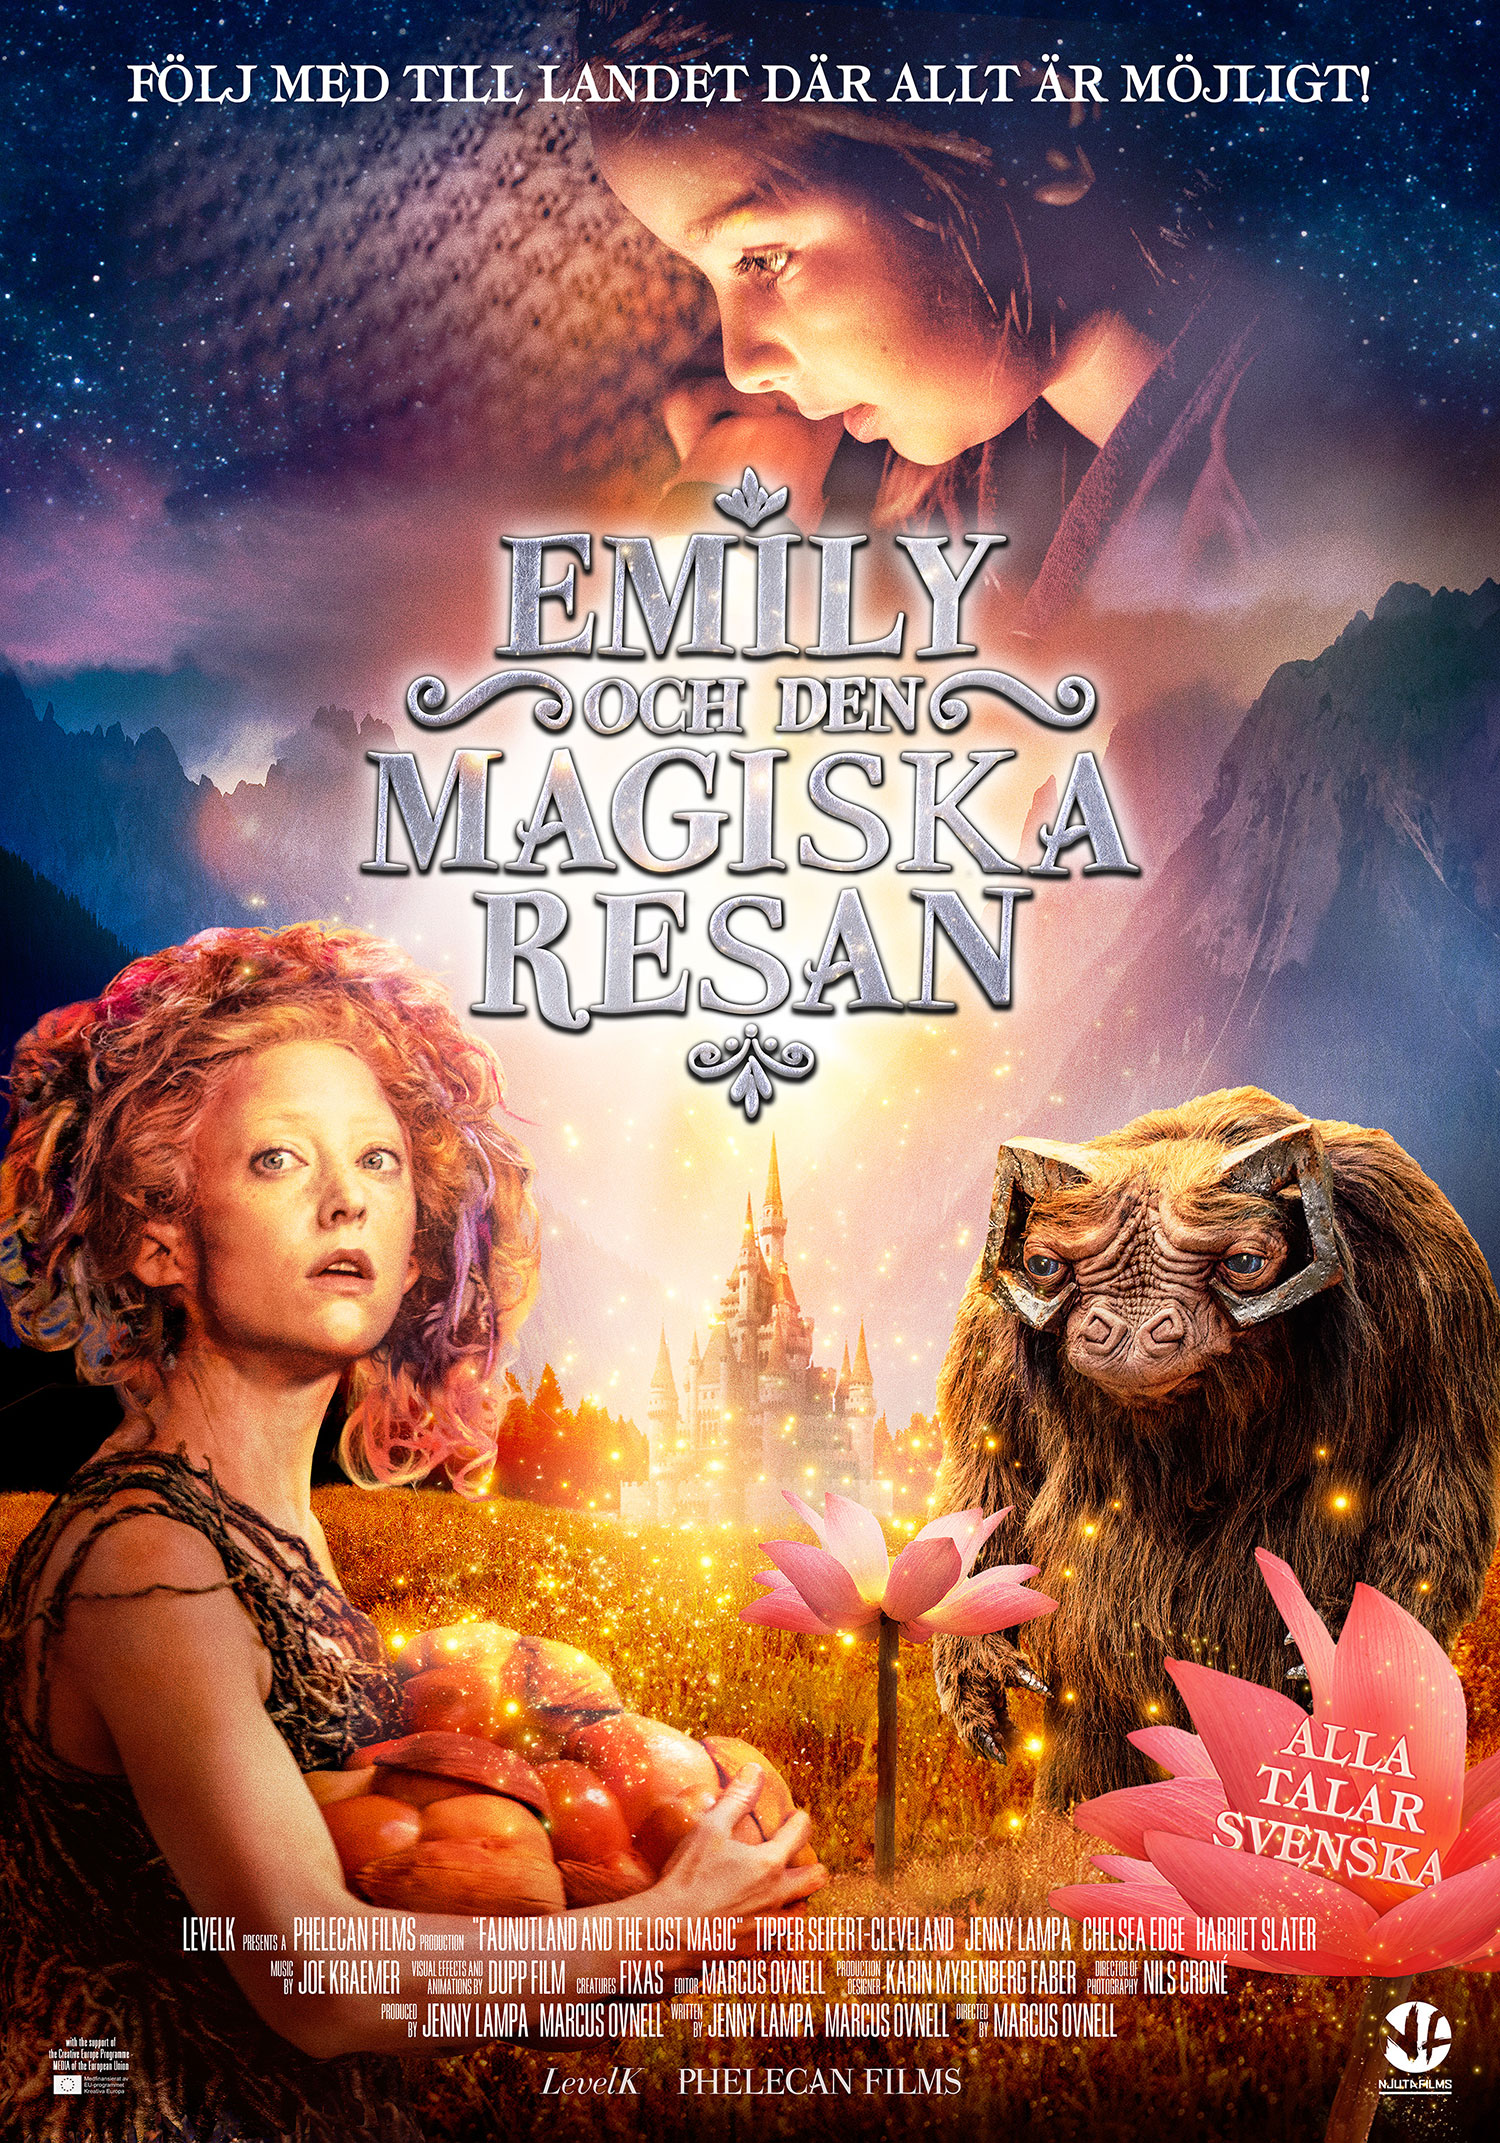 Emily and the Magical Journey will be released in 100 + all over Sweden